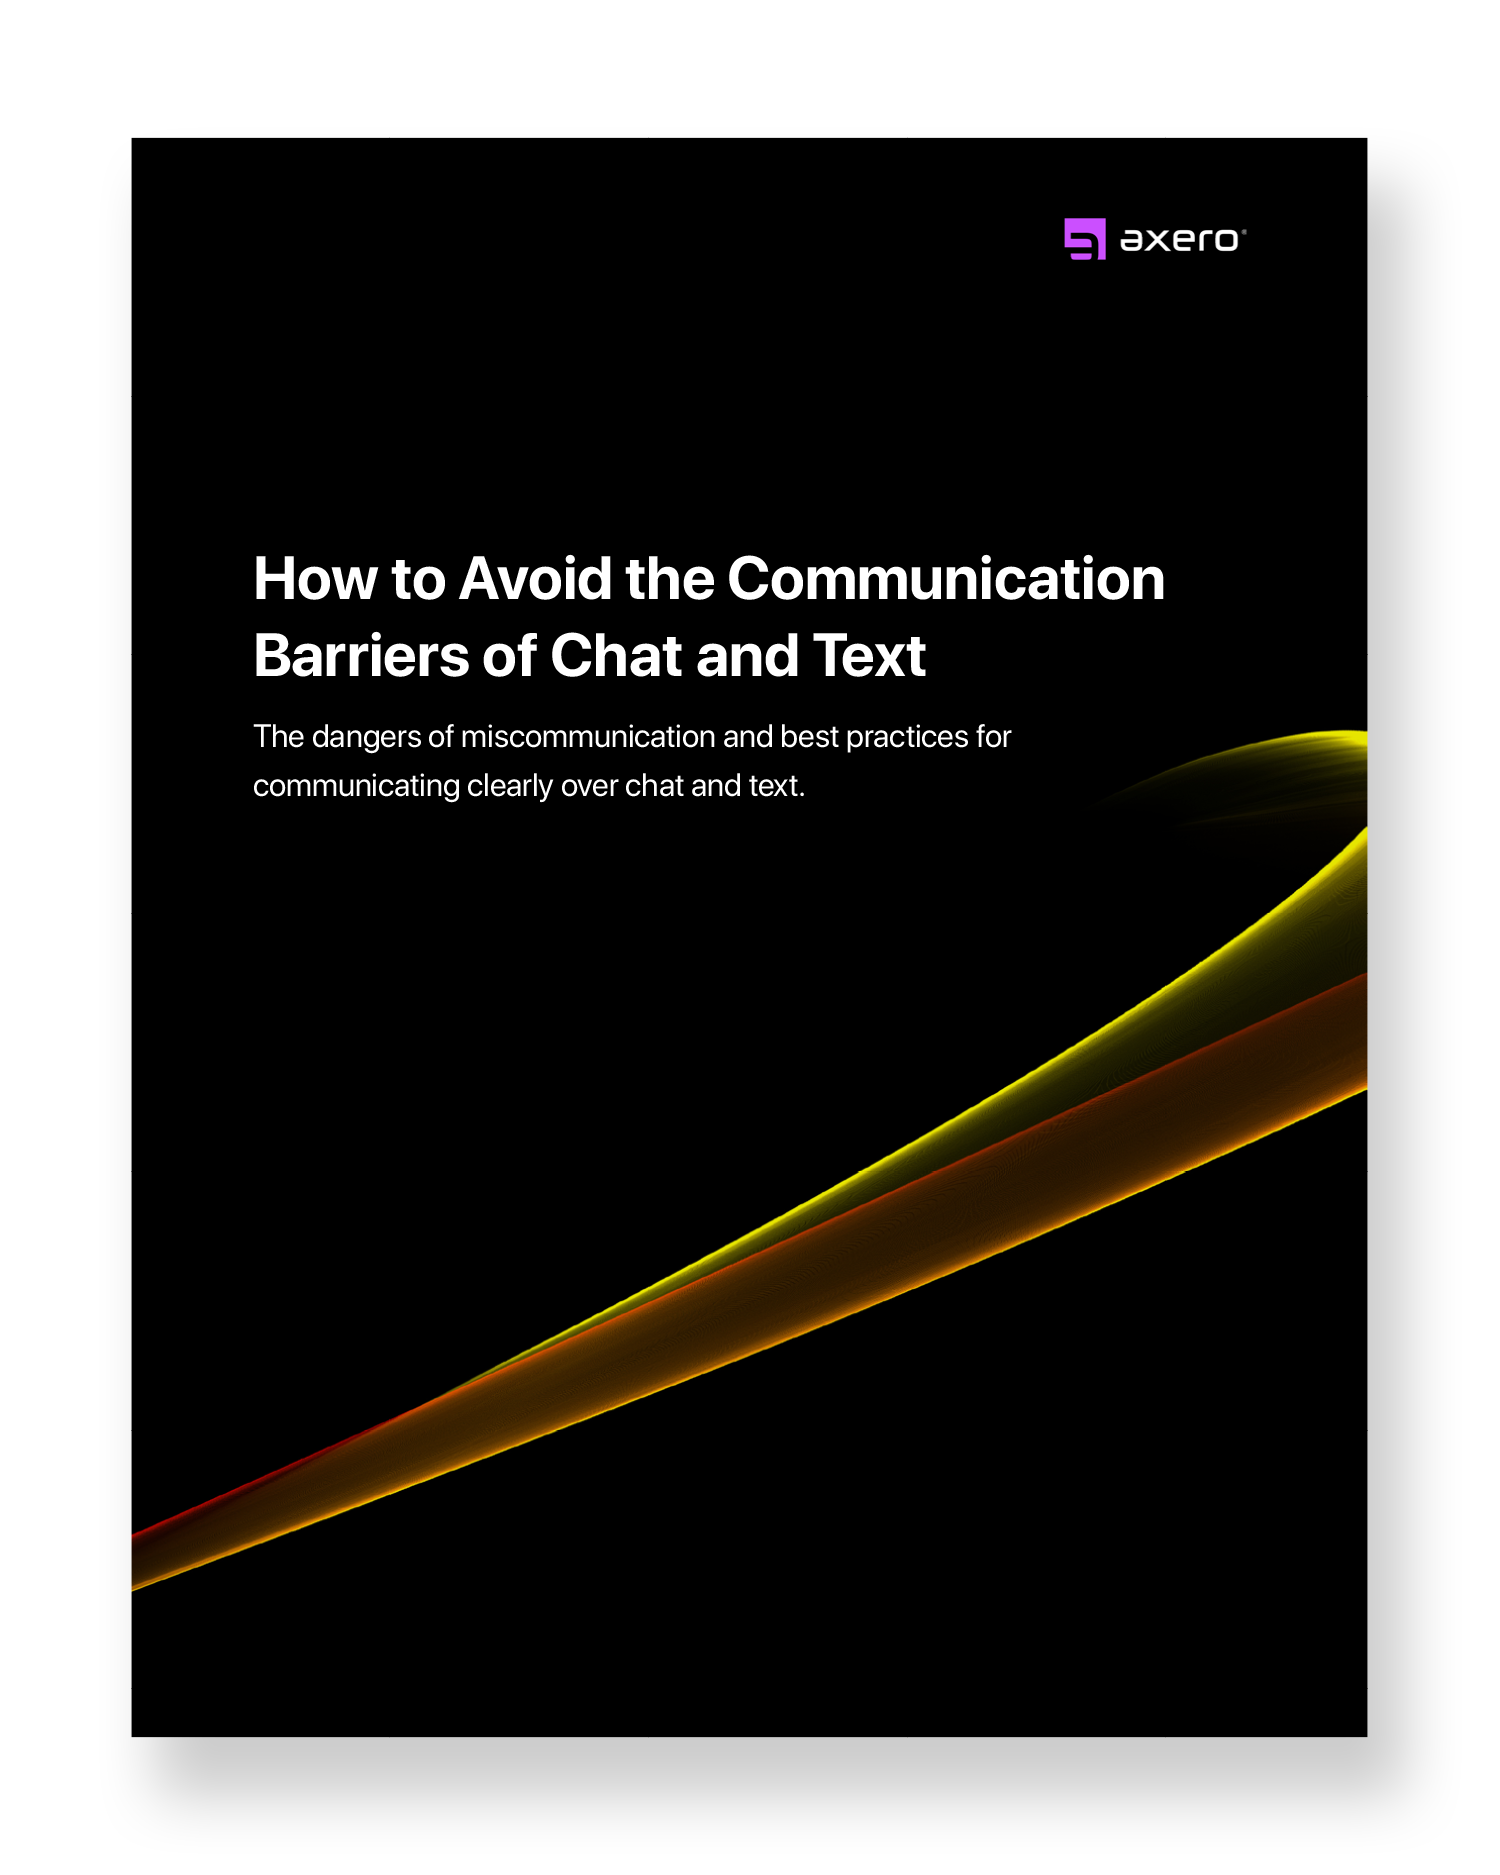 How to Avoid the Communication Barriers of Chat and Text